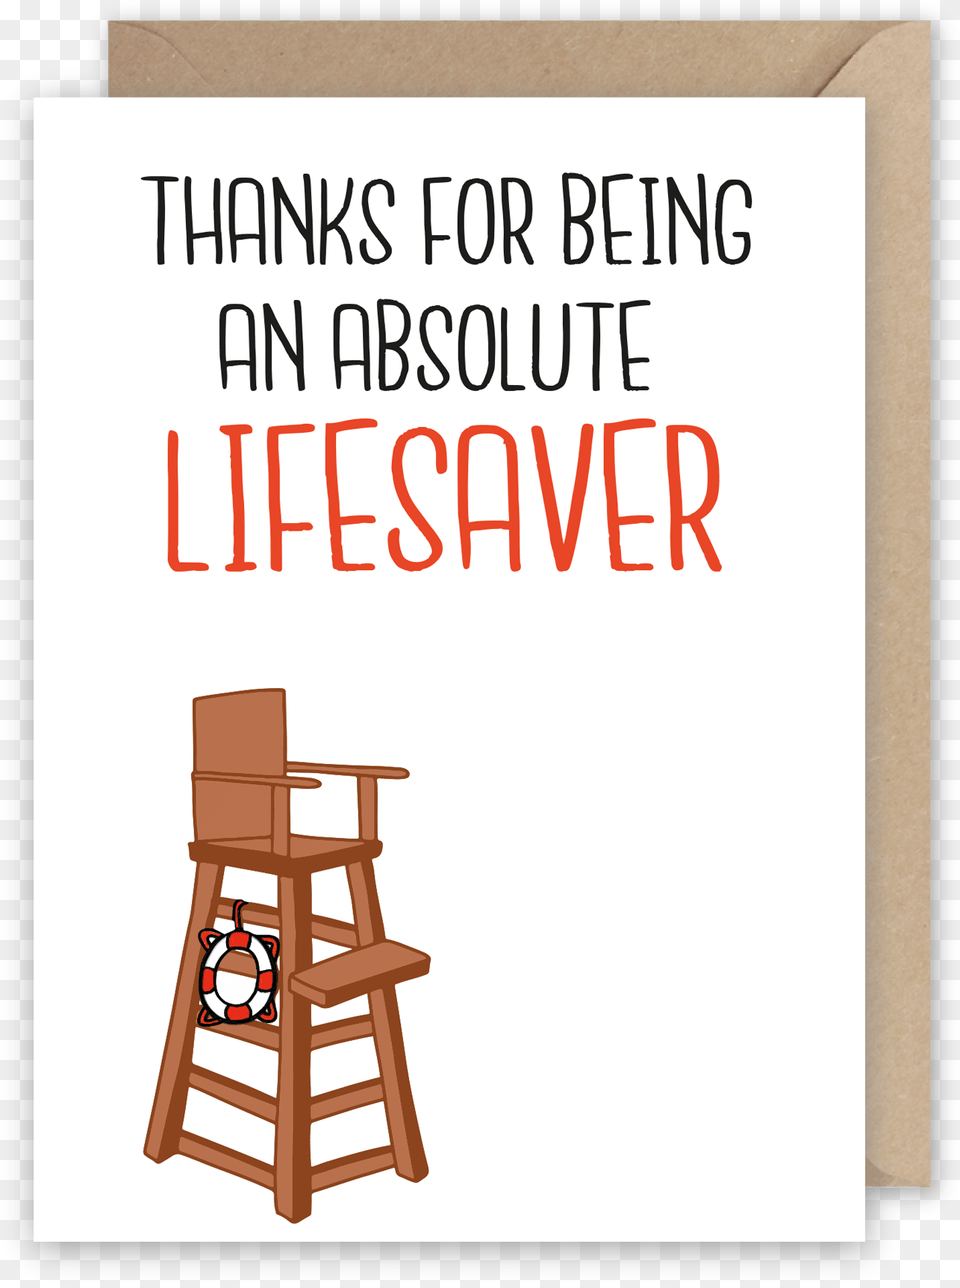 Thanks For Being An Absolute Lifesaver, Furniture, Page, Text, Chair Png Image